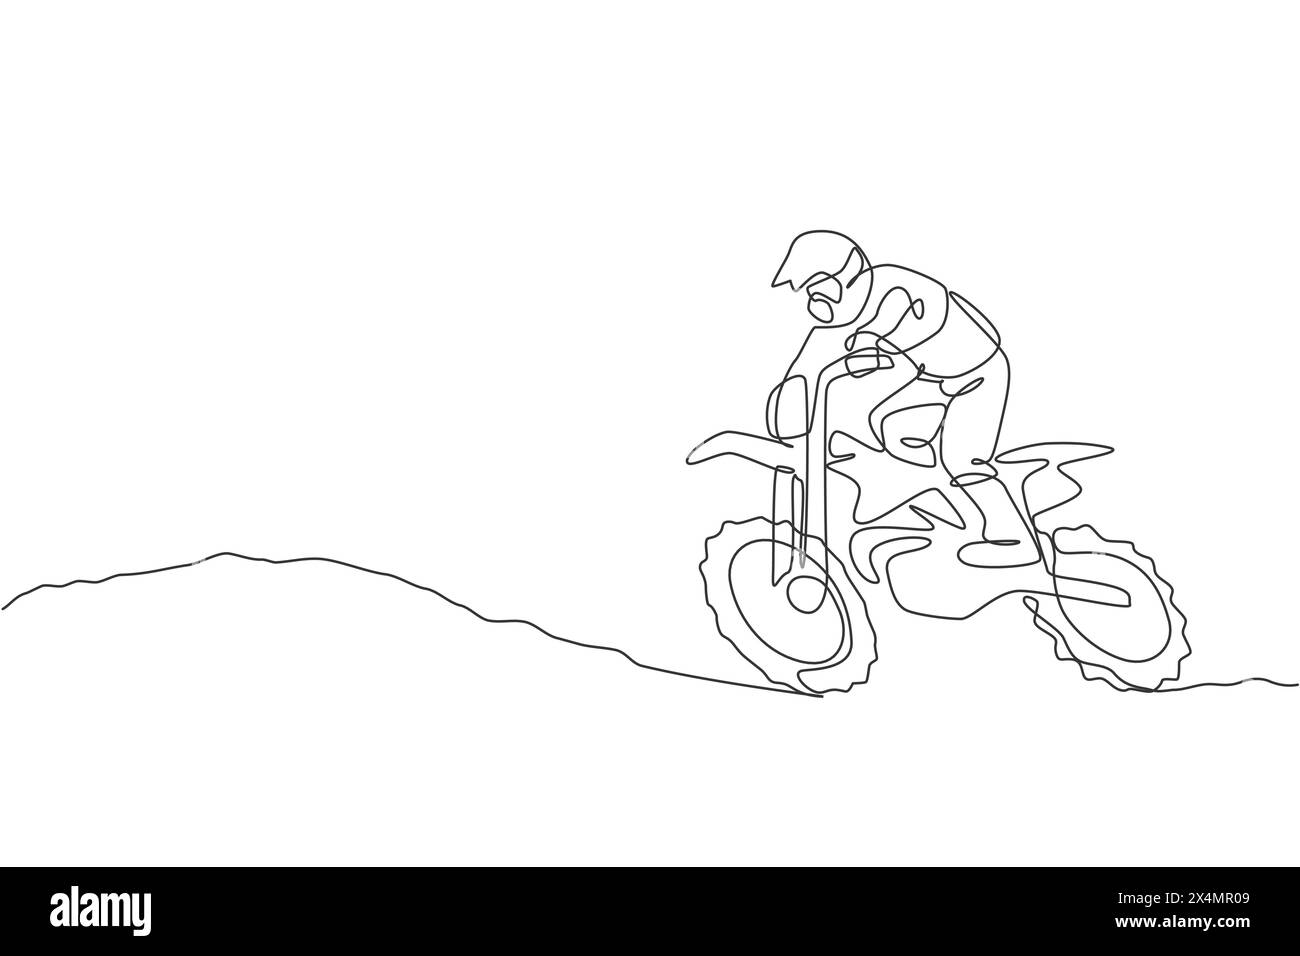 One single line drawing of young motocross rider climb ground hill at race track vector graphic illustration. Extreme sport concept. Modern continuous Stock Vector